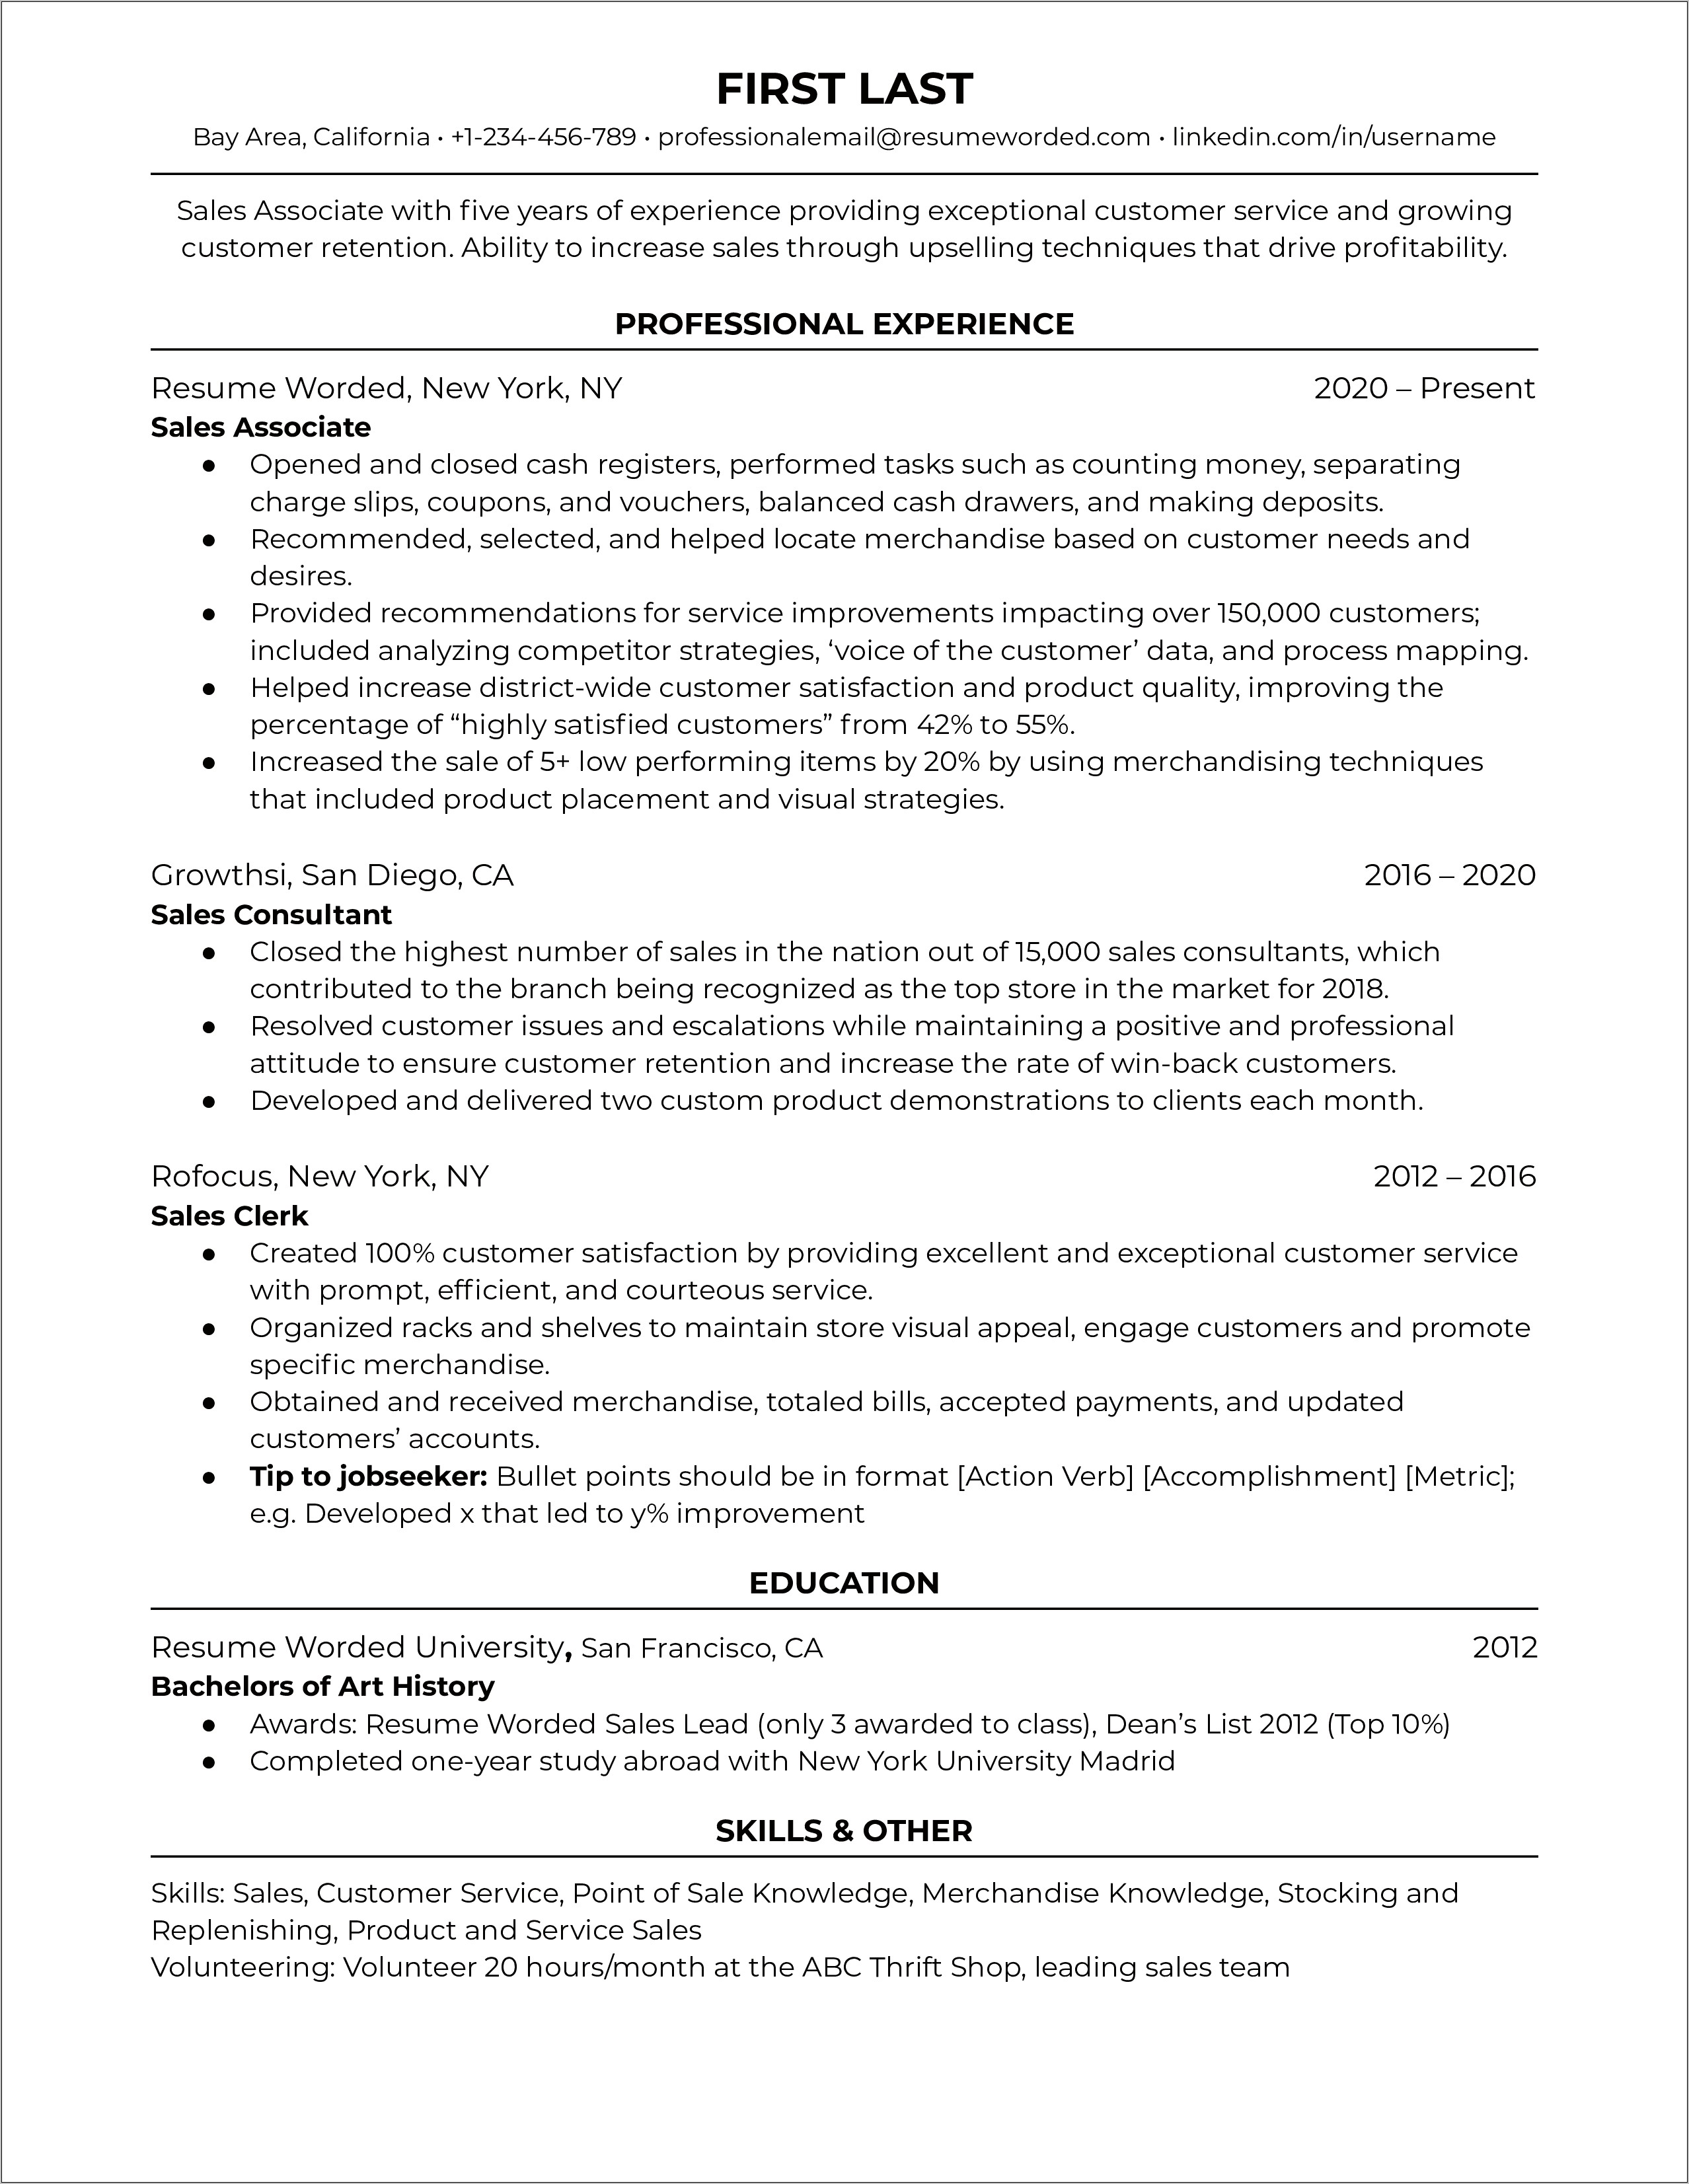 Good Qording For Sales Experience Resume